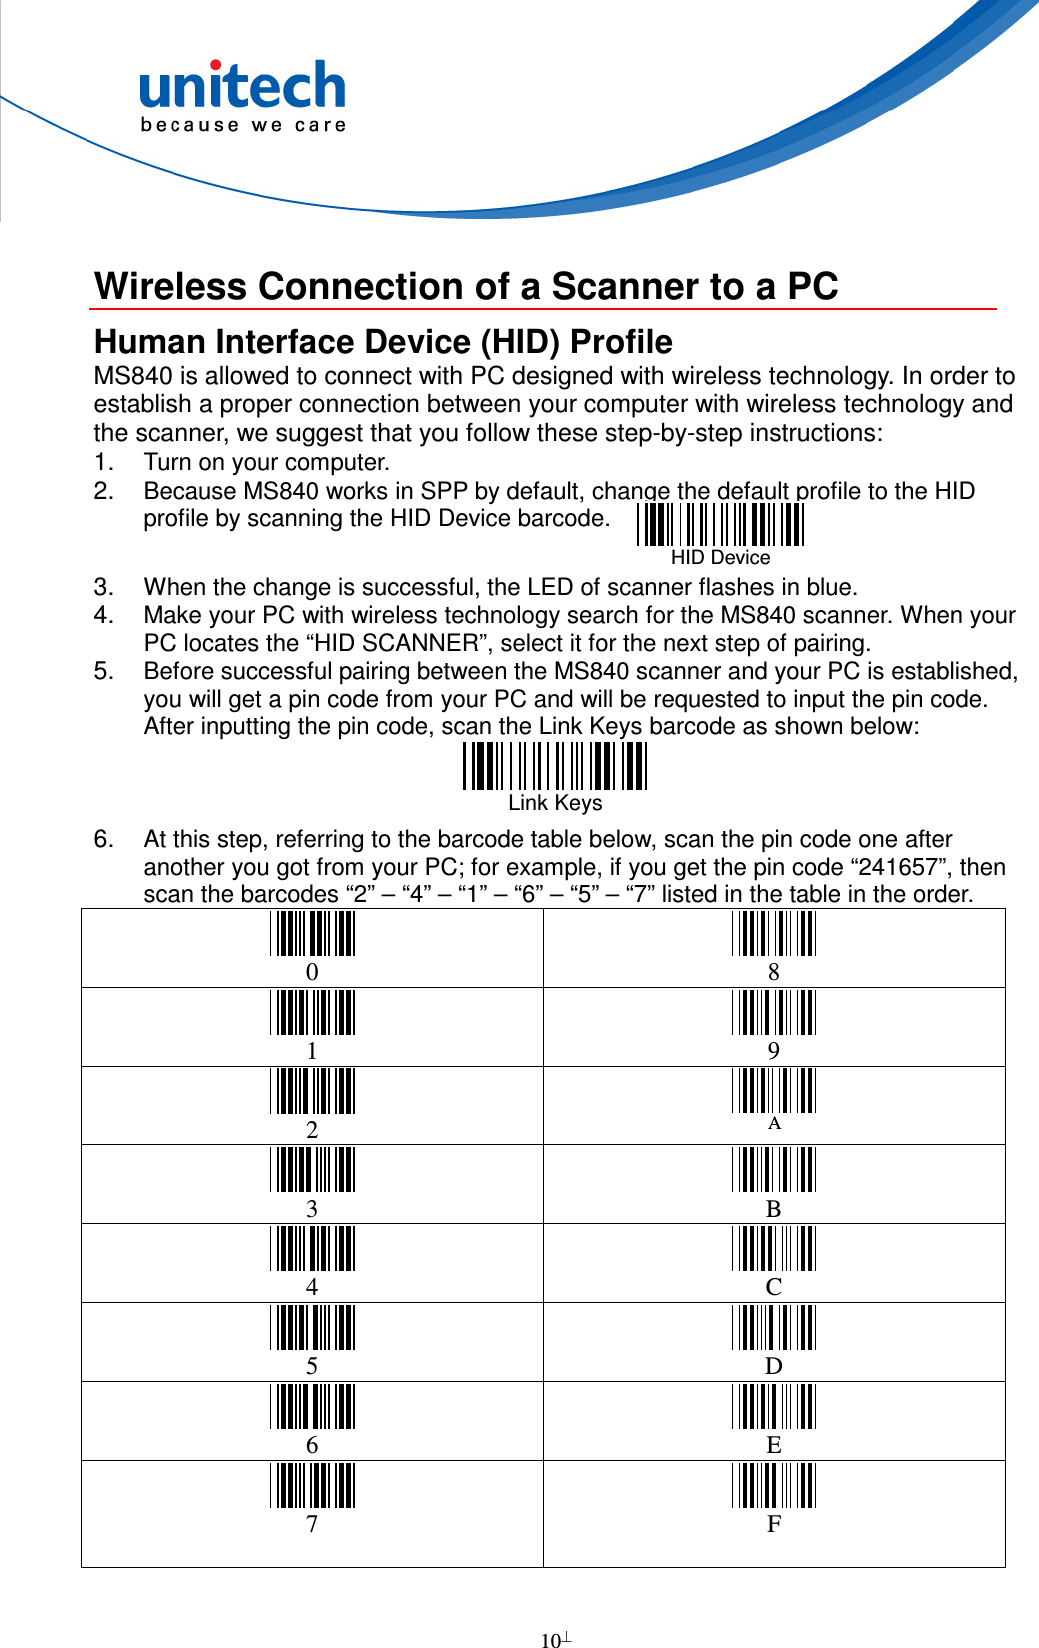  10   Wireless Connection of a Scanner to a PC Human Interface Device (HID) Profile MS840 is allowed to connect with PC designed with wireless technology. In order to establish a proper connection between your computer with wireless technology and the scanner, we suggest that you follow these step-by-step instructions: 1. Turn on your computer.   2. Because MS840 works in SPP by default, change the default profile to the HID profile by scanning the HID Device barcode.    3. When the change is successful, the LED of scanner flashes in blue. 4. Make your PC with wireless technology search for the MS840 scanner. When your PC locates the “HID SCANNER”, select it for the next step of pairing. 5. Before successful pairing between the MS840 scanner and your PC is established, you will get a pin code from your PC and will be requested to input the pin code. After inputting the pin code, scan the Link Keys barcode as shown below:  Link Keys   6. At this step, referring to the barcode table below, scan the pin code one after another you got from your PC; for example, if you get the pin code “241657”, then scan the barcodes “2” – “4” – “1” – “6” – “5” – “7” listed in the table in the order.  0   8  1   9  2 A  3   B  4   C  5   D  6   E  7   F   HID Device  